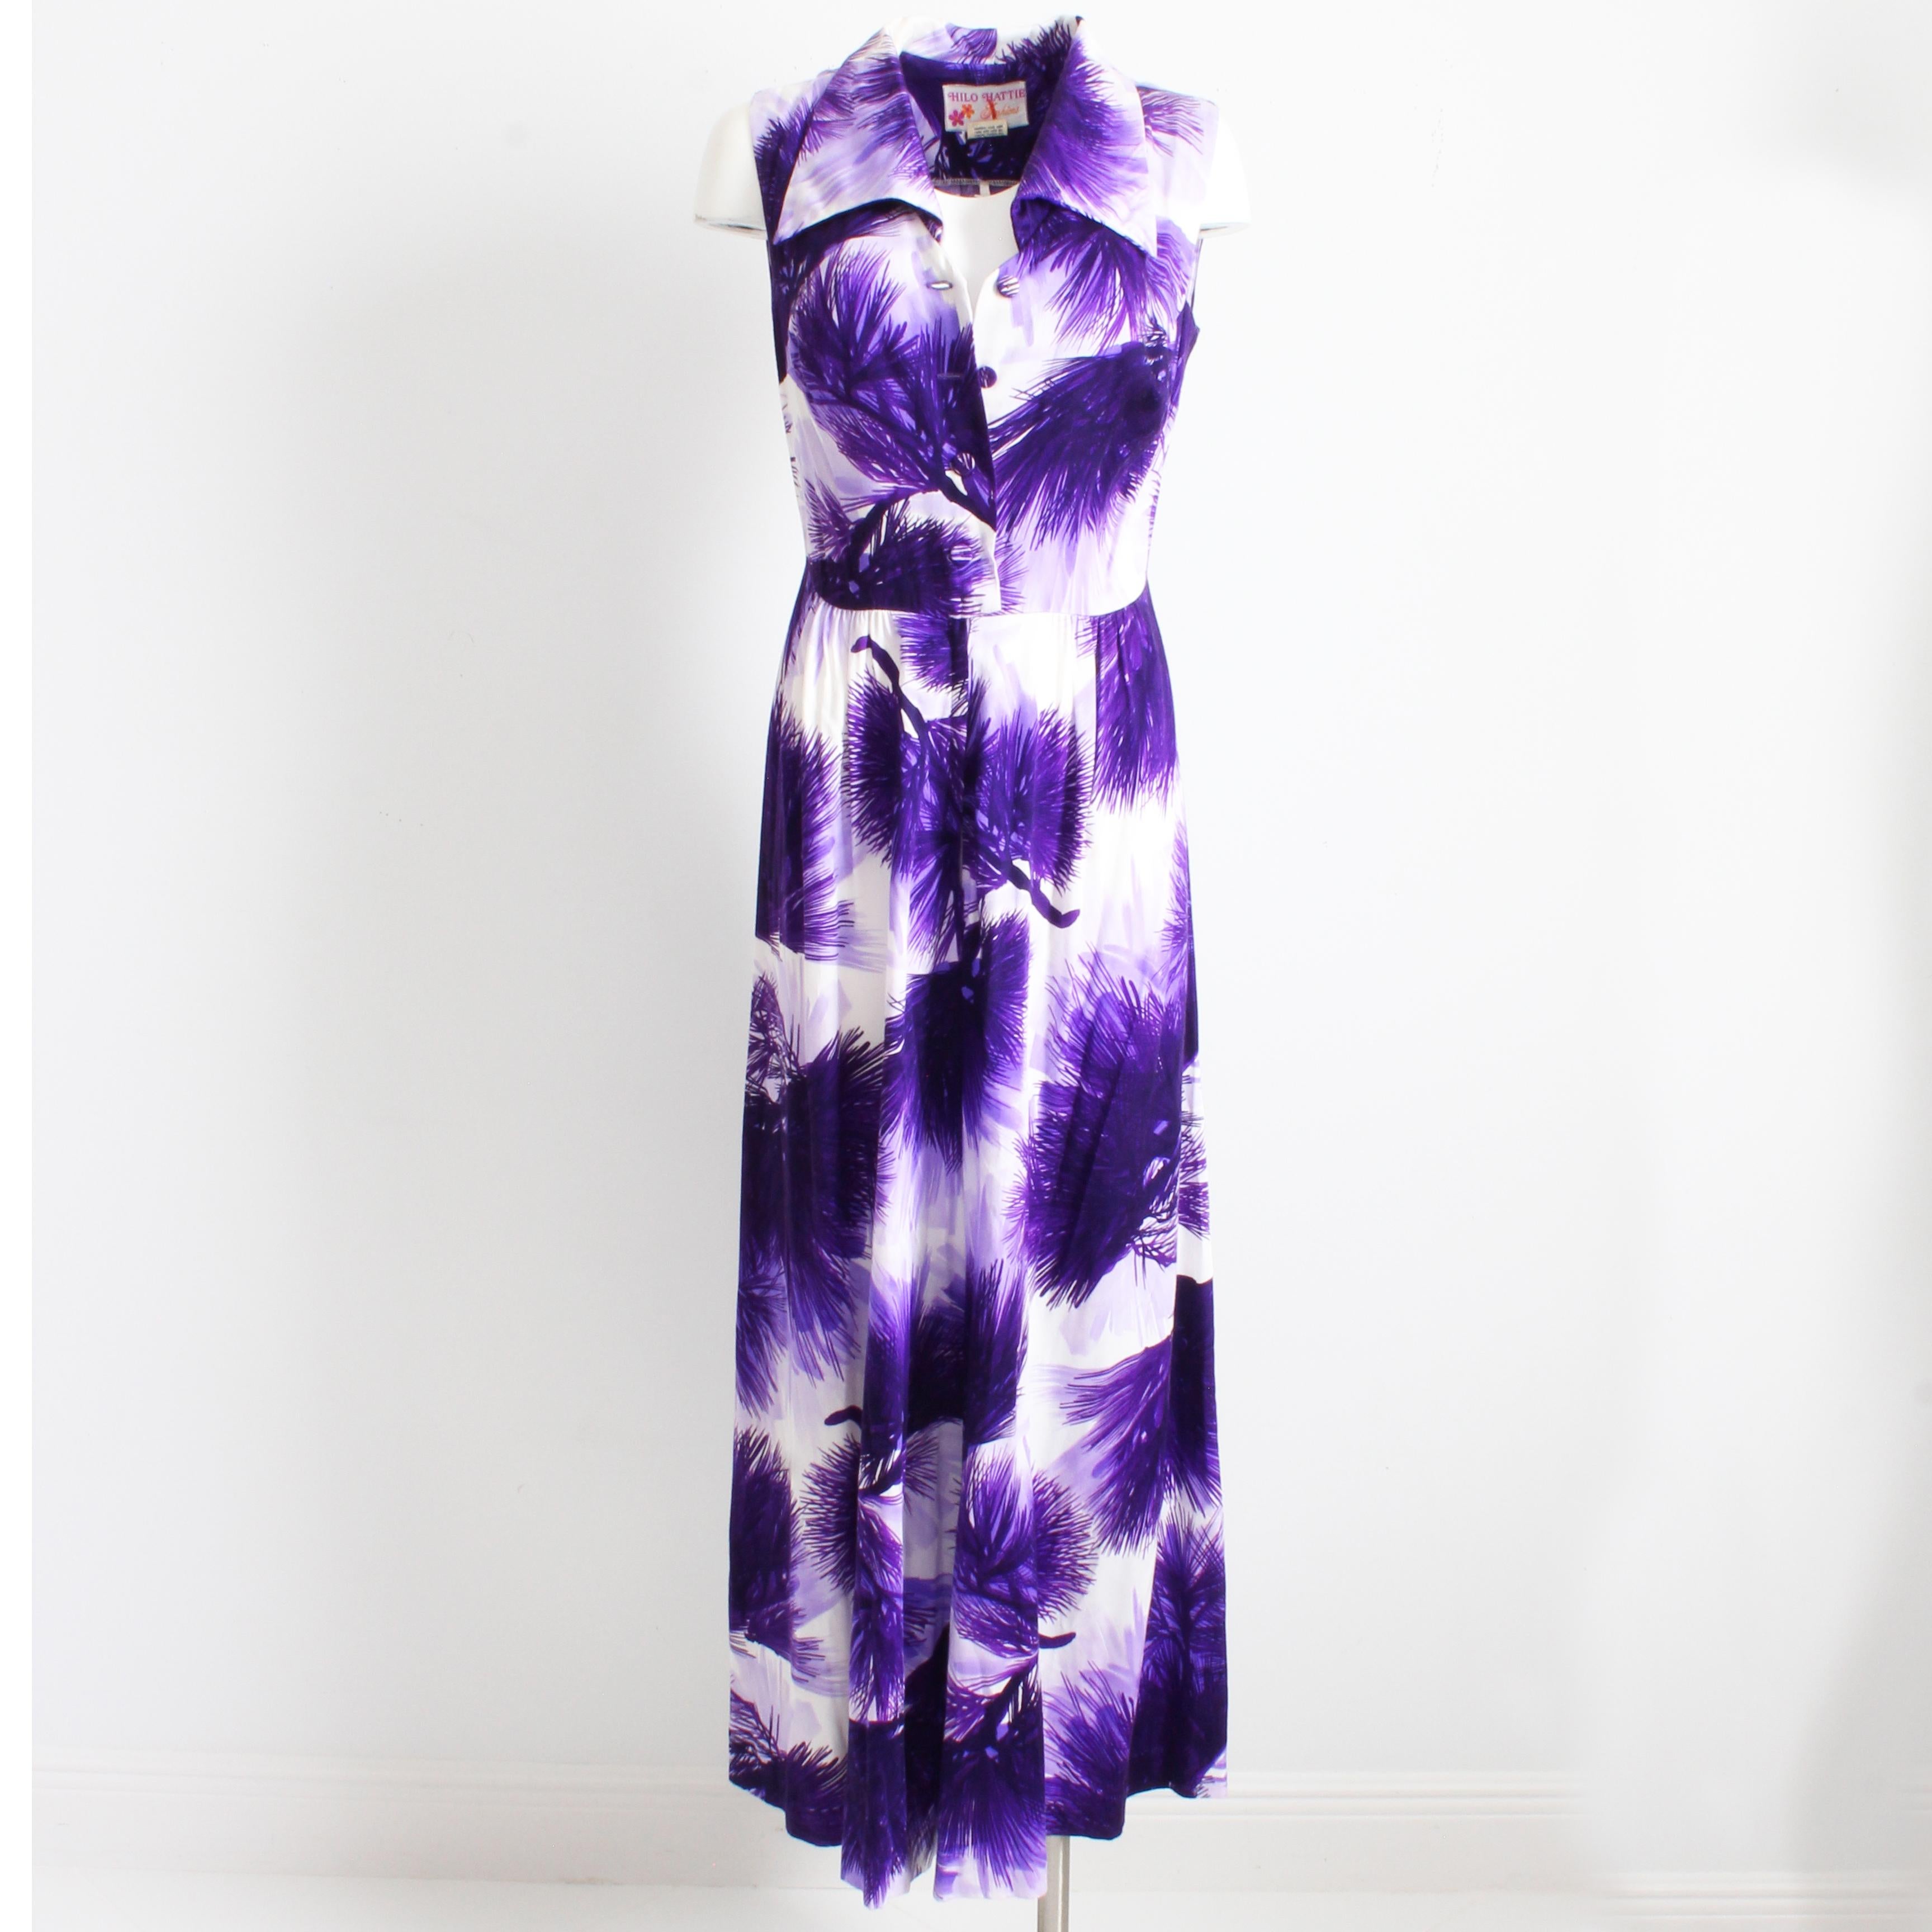 A fabulous vintage palazzo jumpsuit, made by Hilo Hattie in the 1970s.  Made from a poly-blend fabric, it features a vivid lavender and lilac hued floral print against a white background.  The palazzo pant legs are both comfortable and stylish, and